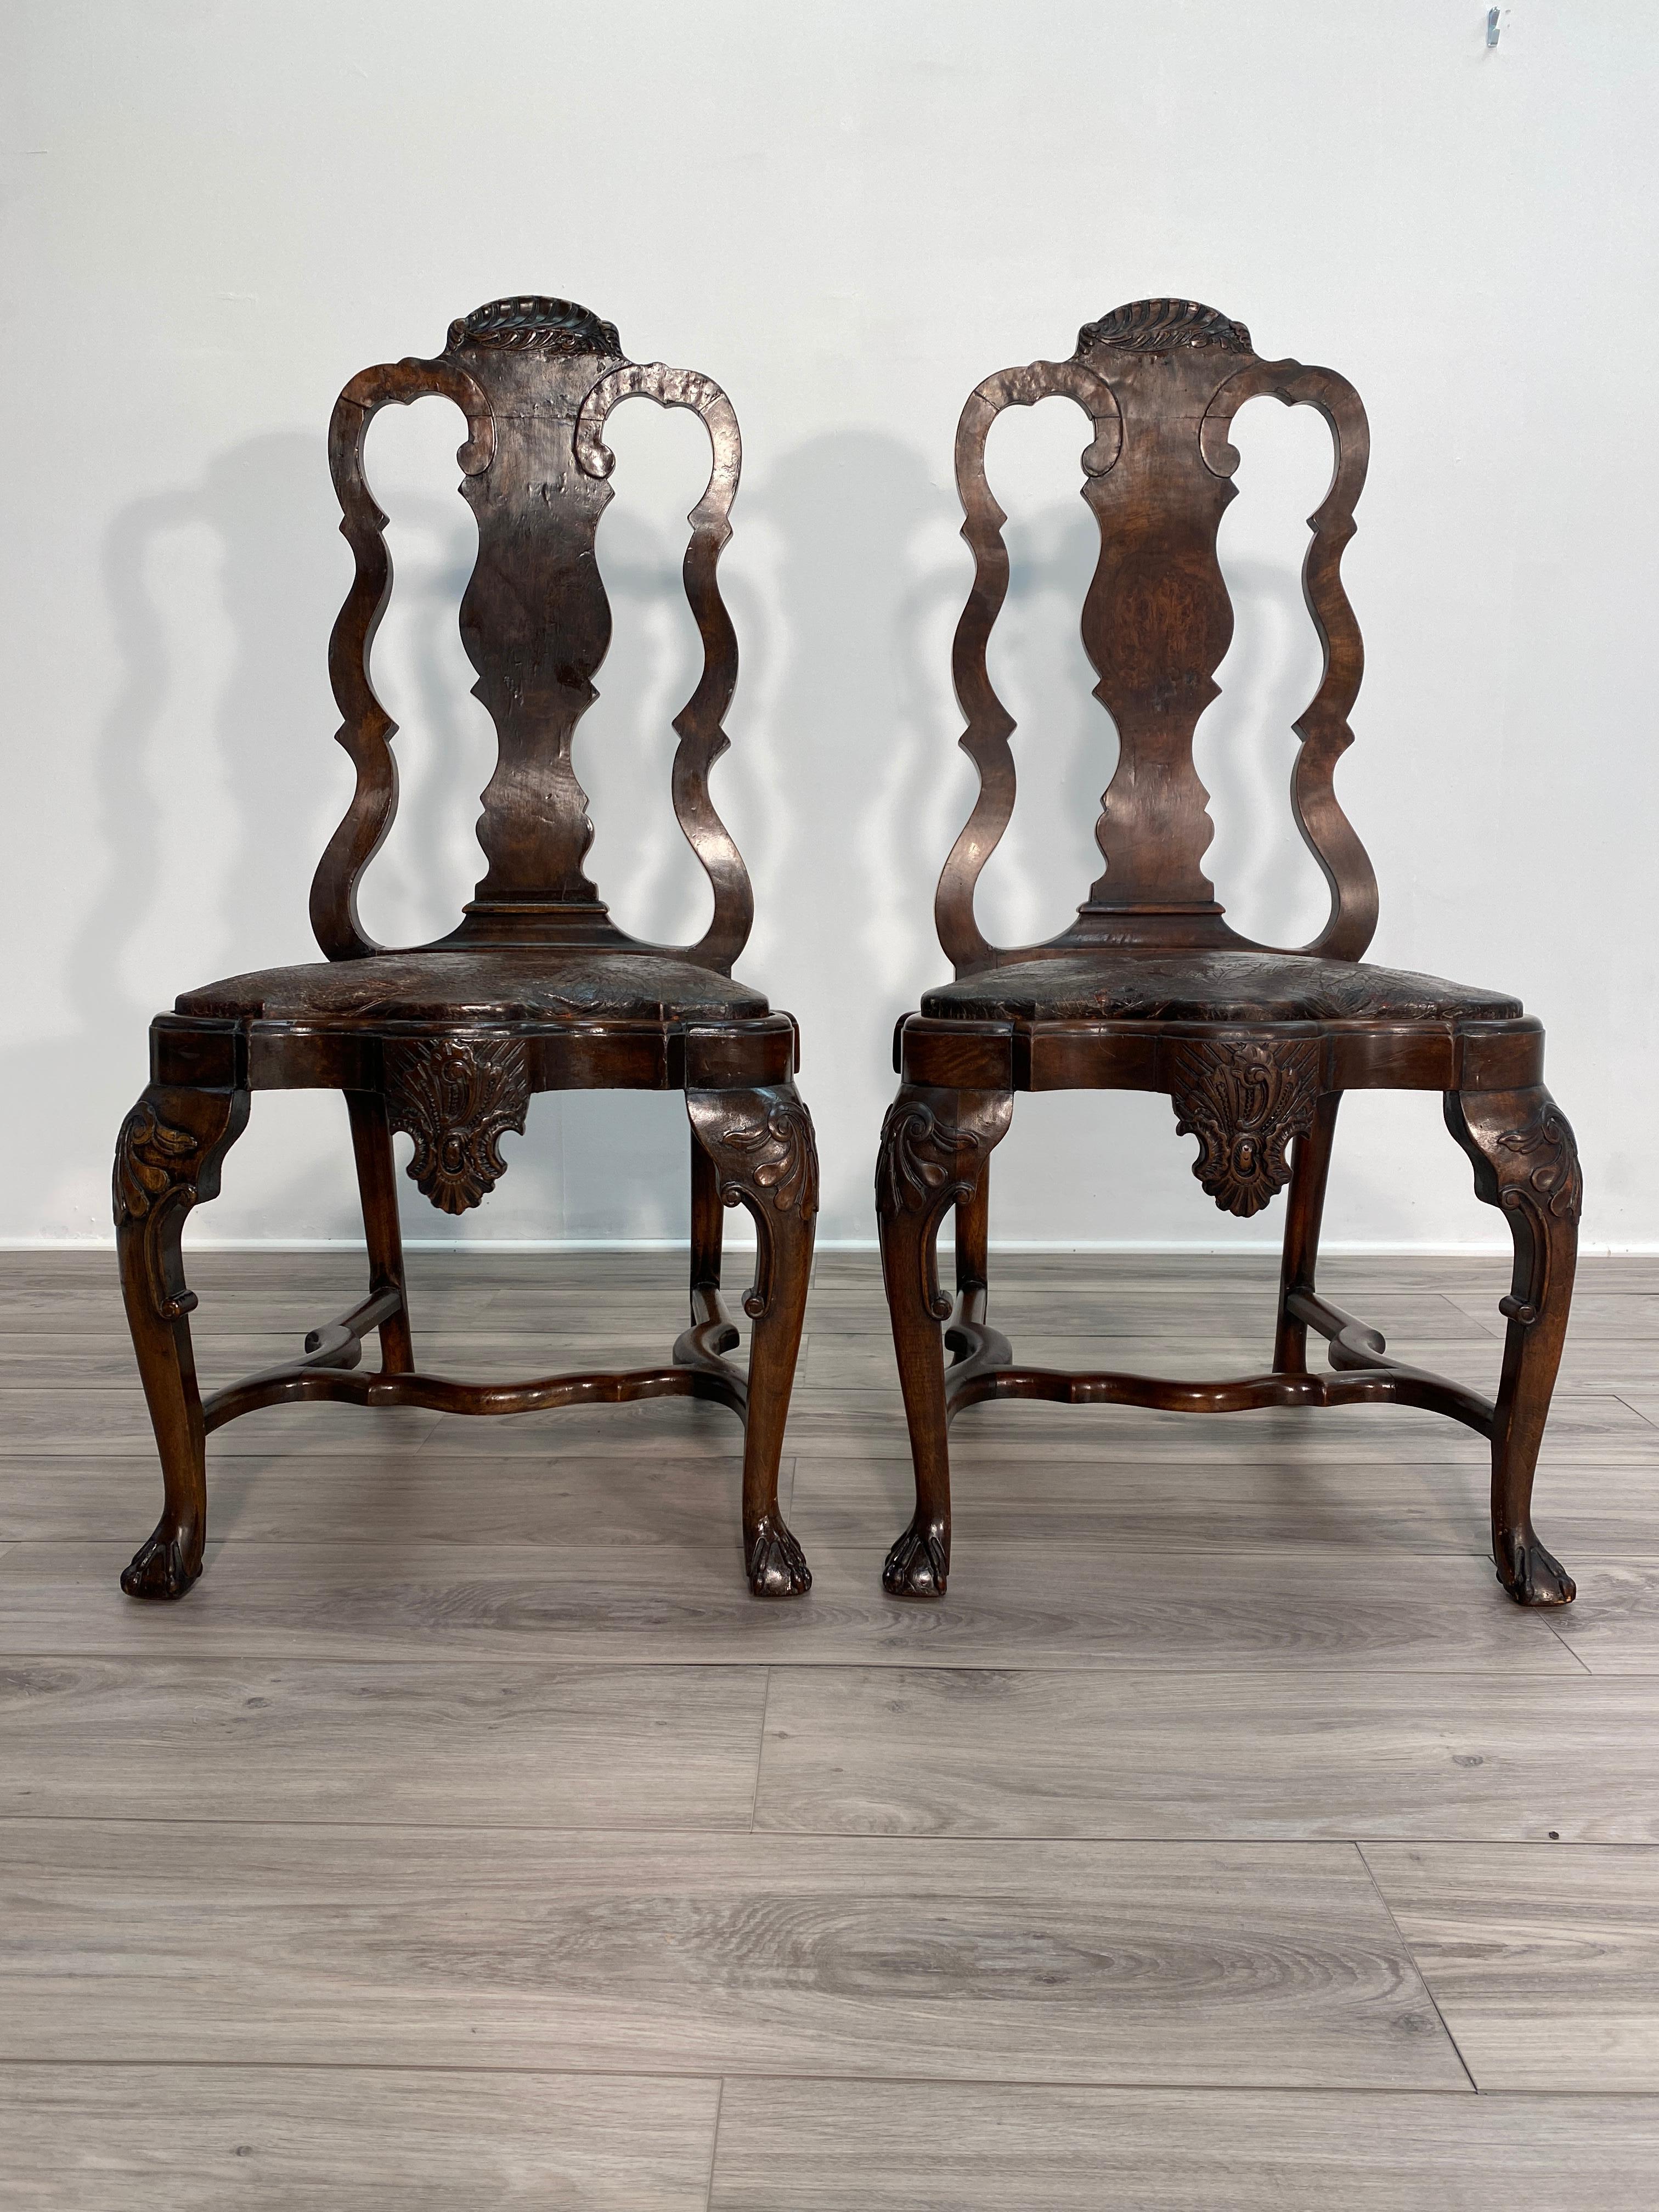 Wonderful pair of heavily carved 18th century Dutch side chairs. Both chairs have shell carvings in the crest rails. The knees are carved with Rococo themed acanthus patterns, rounding into cabriolet legs terminating in carved claw feet. The legs